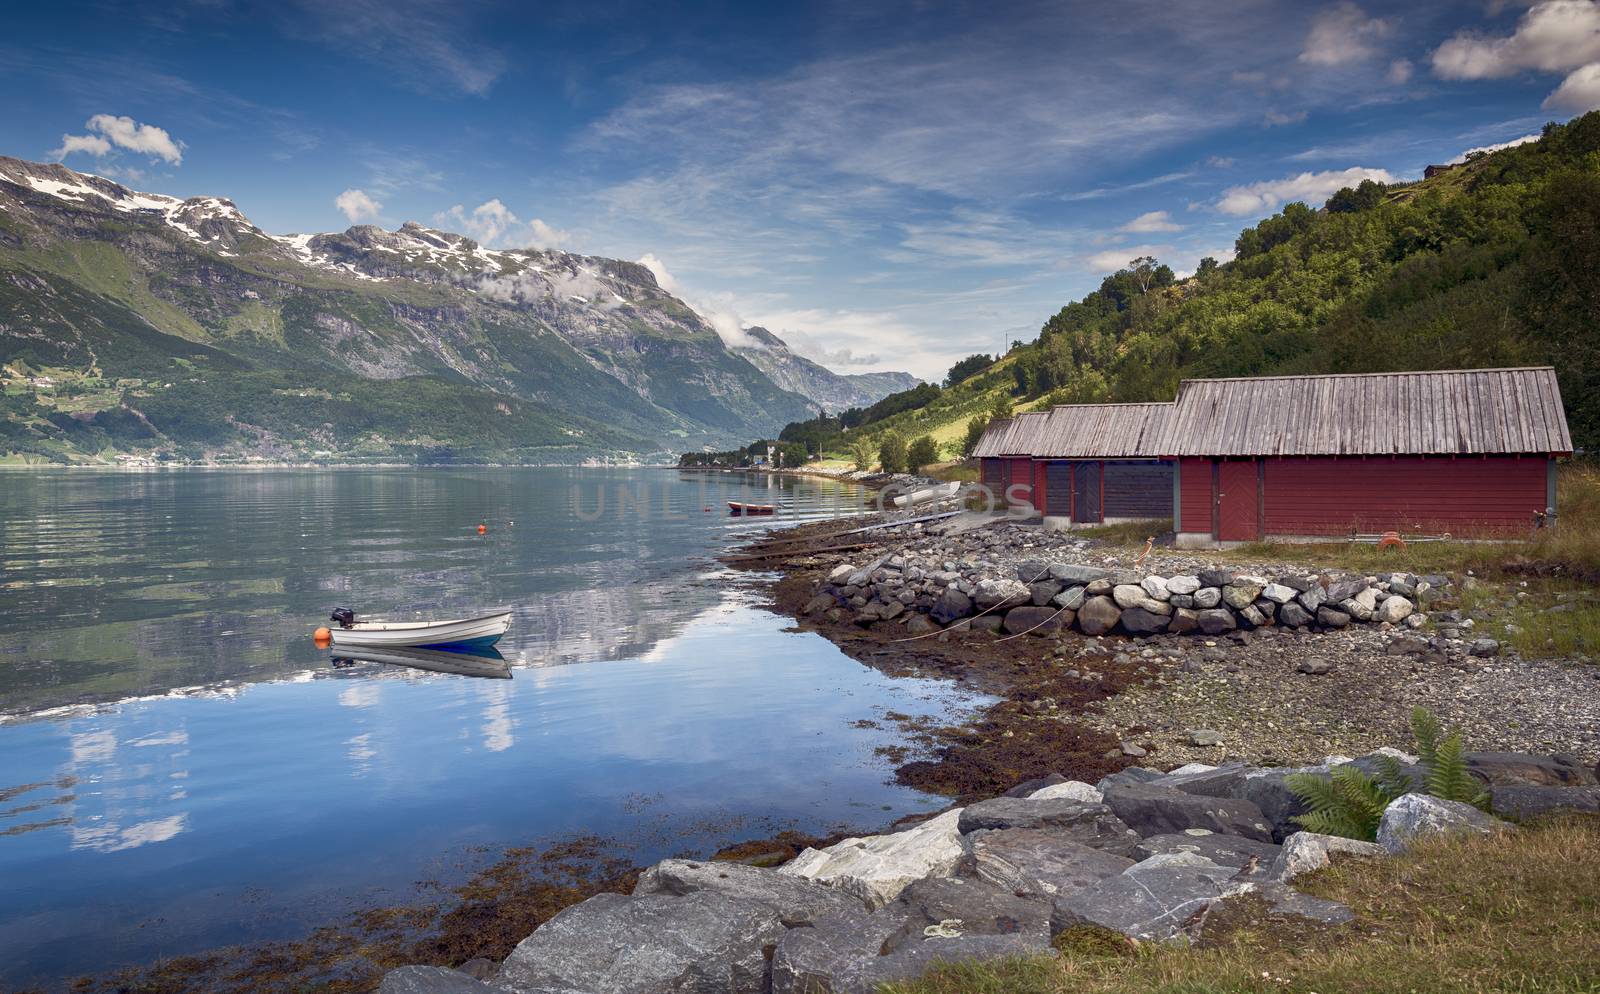 red houses and a boat in the fjord in norway with mountains as background